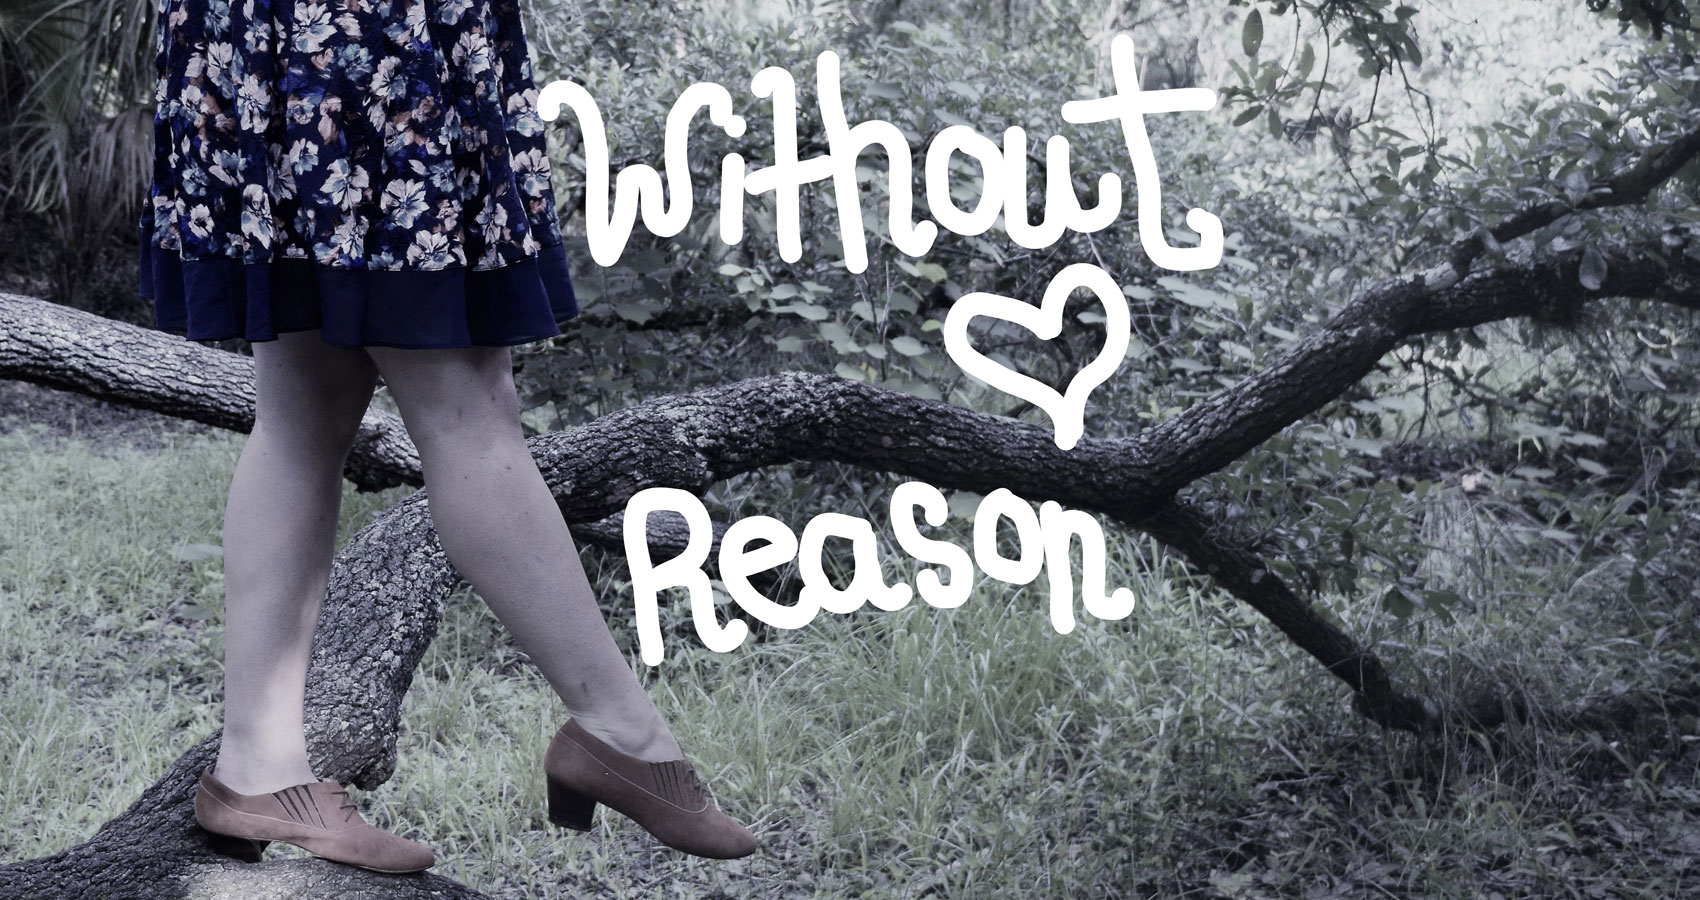 Without Reason series by Alyssa Brocker at Spillwords.com